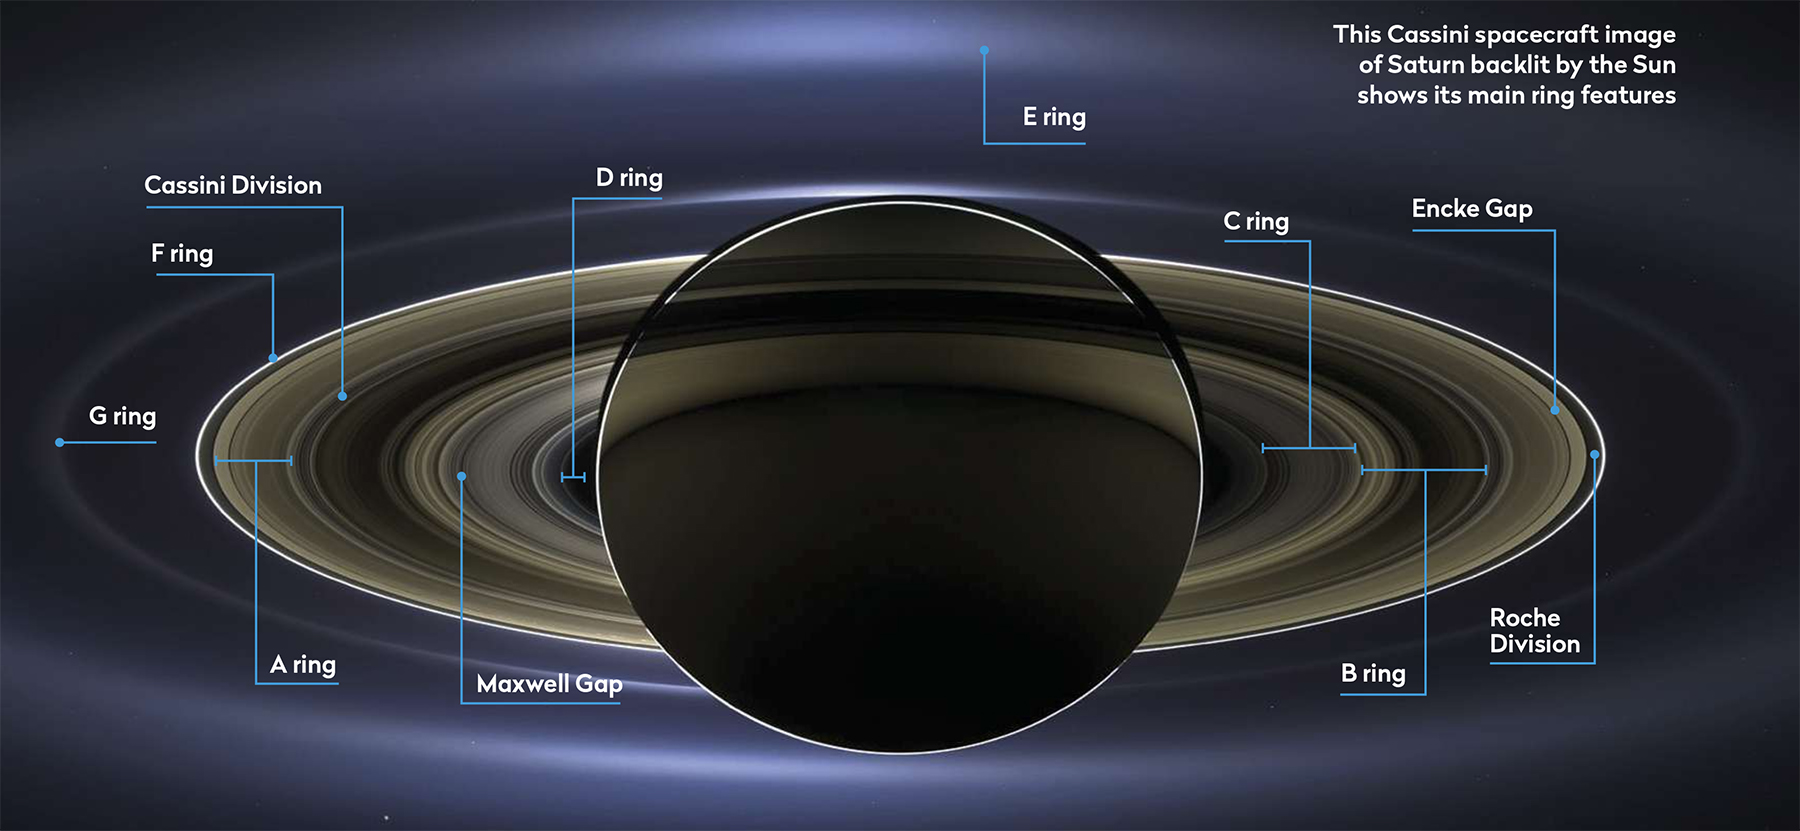 Nuclear Blast Drop Rings of Saturn - 'We Do Not Tolerate Threats'